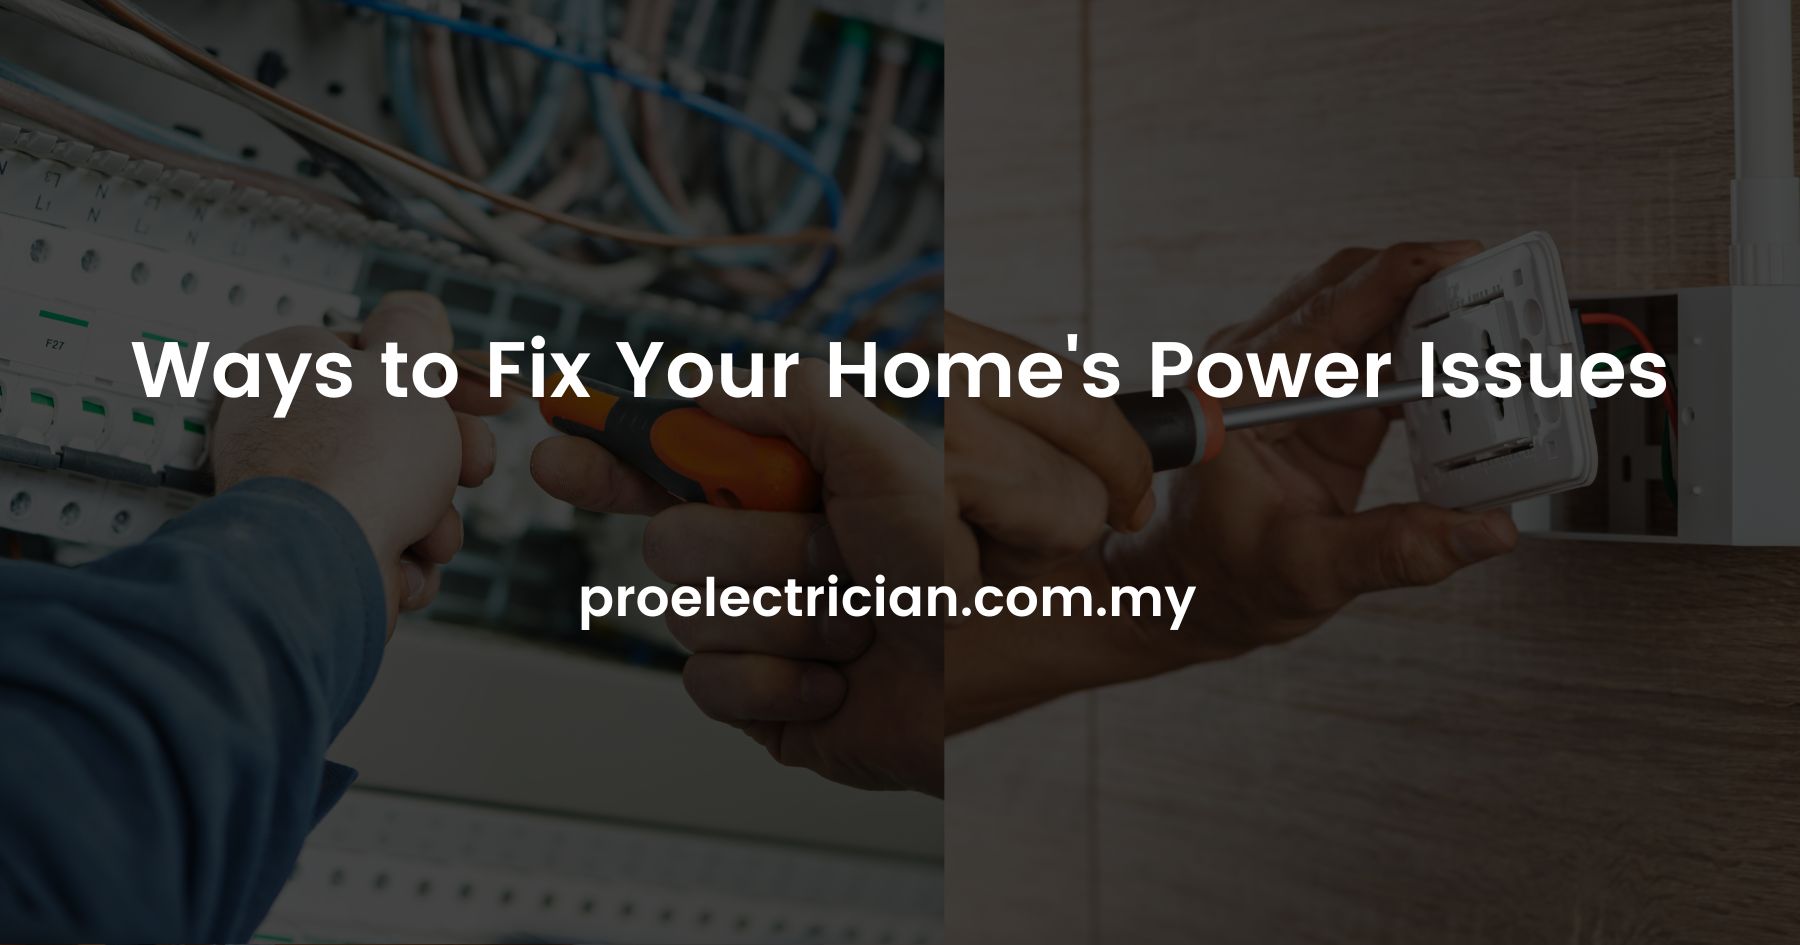 Ways to Fix Your Home's Power Issues